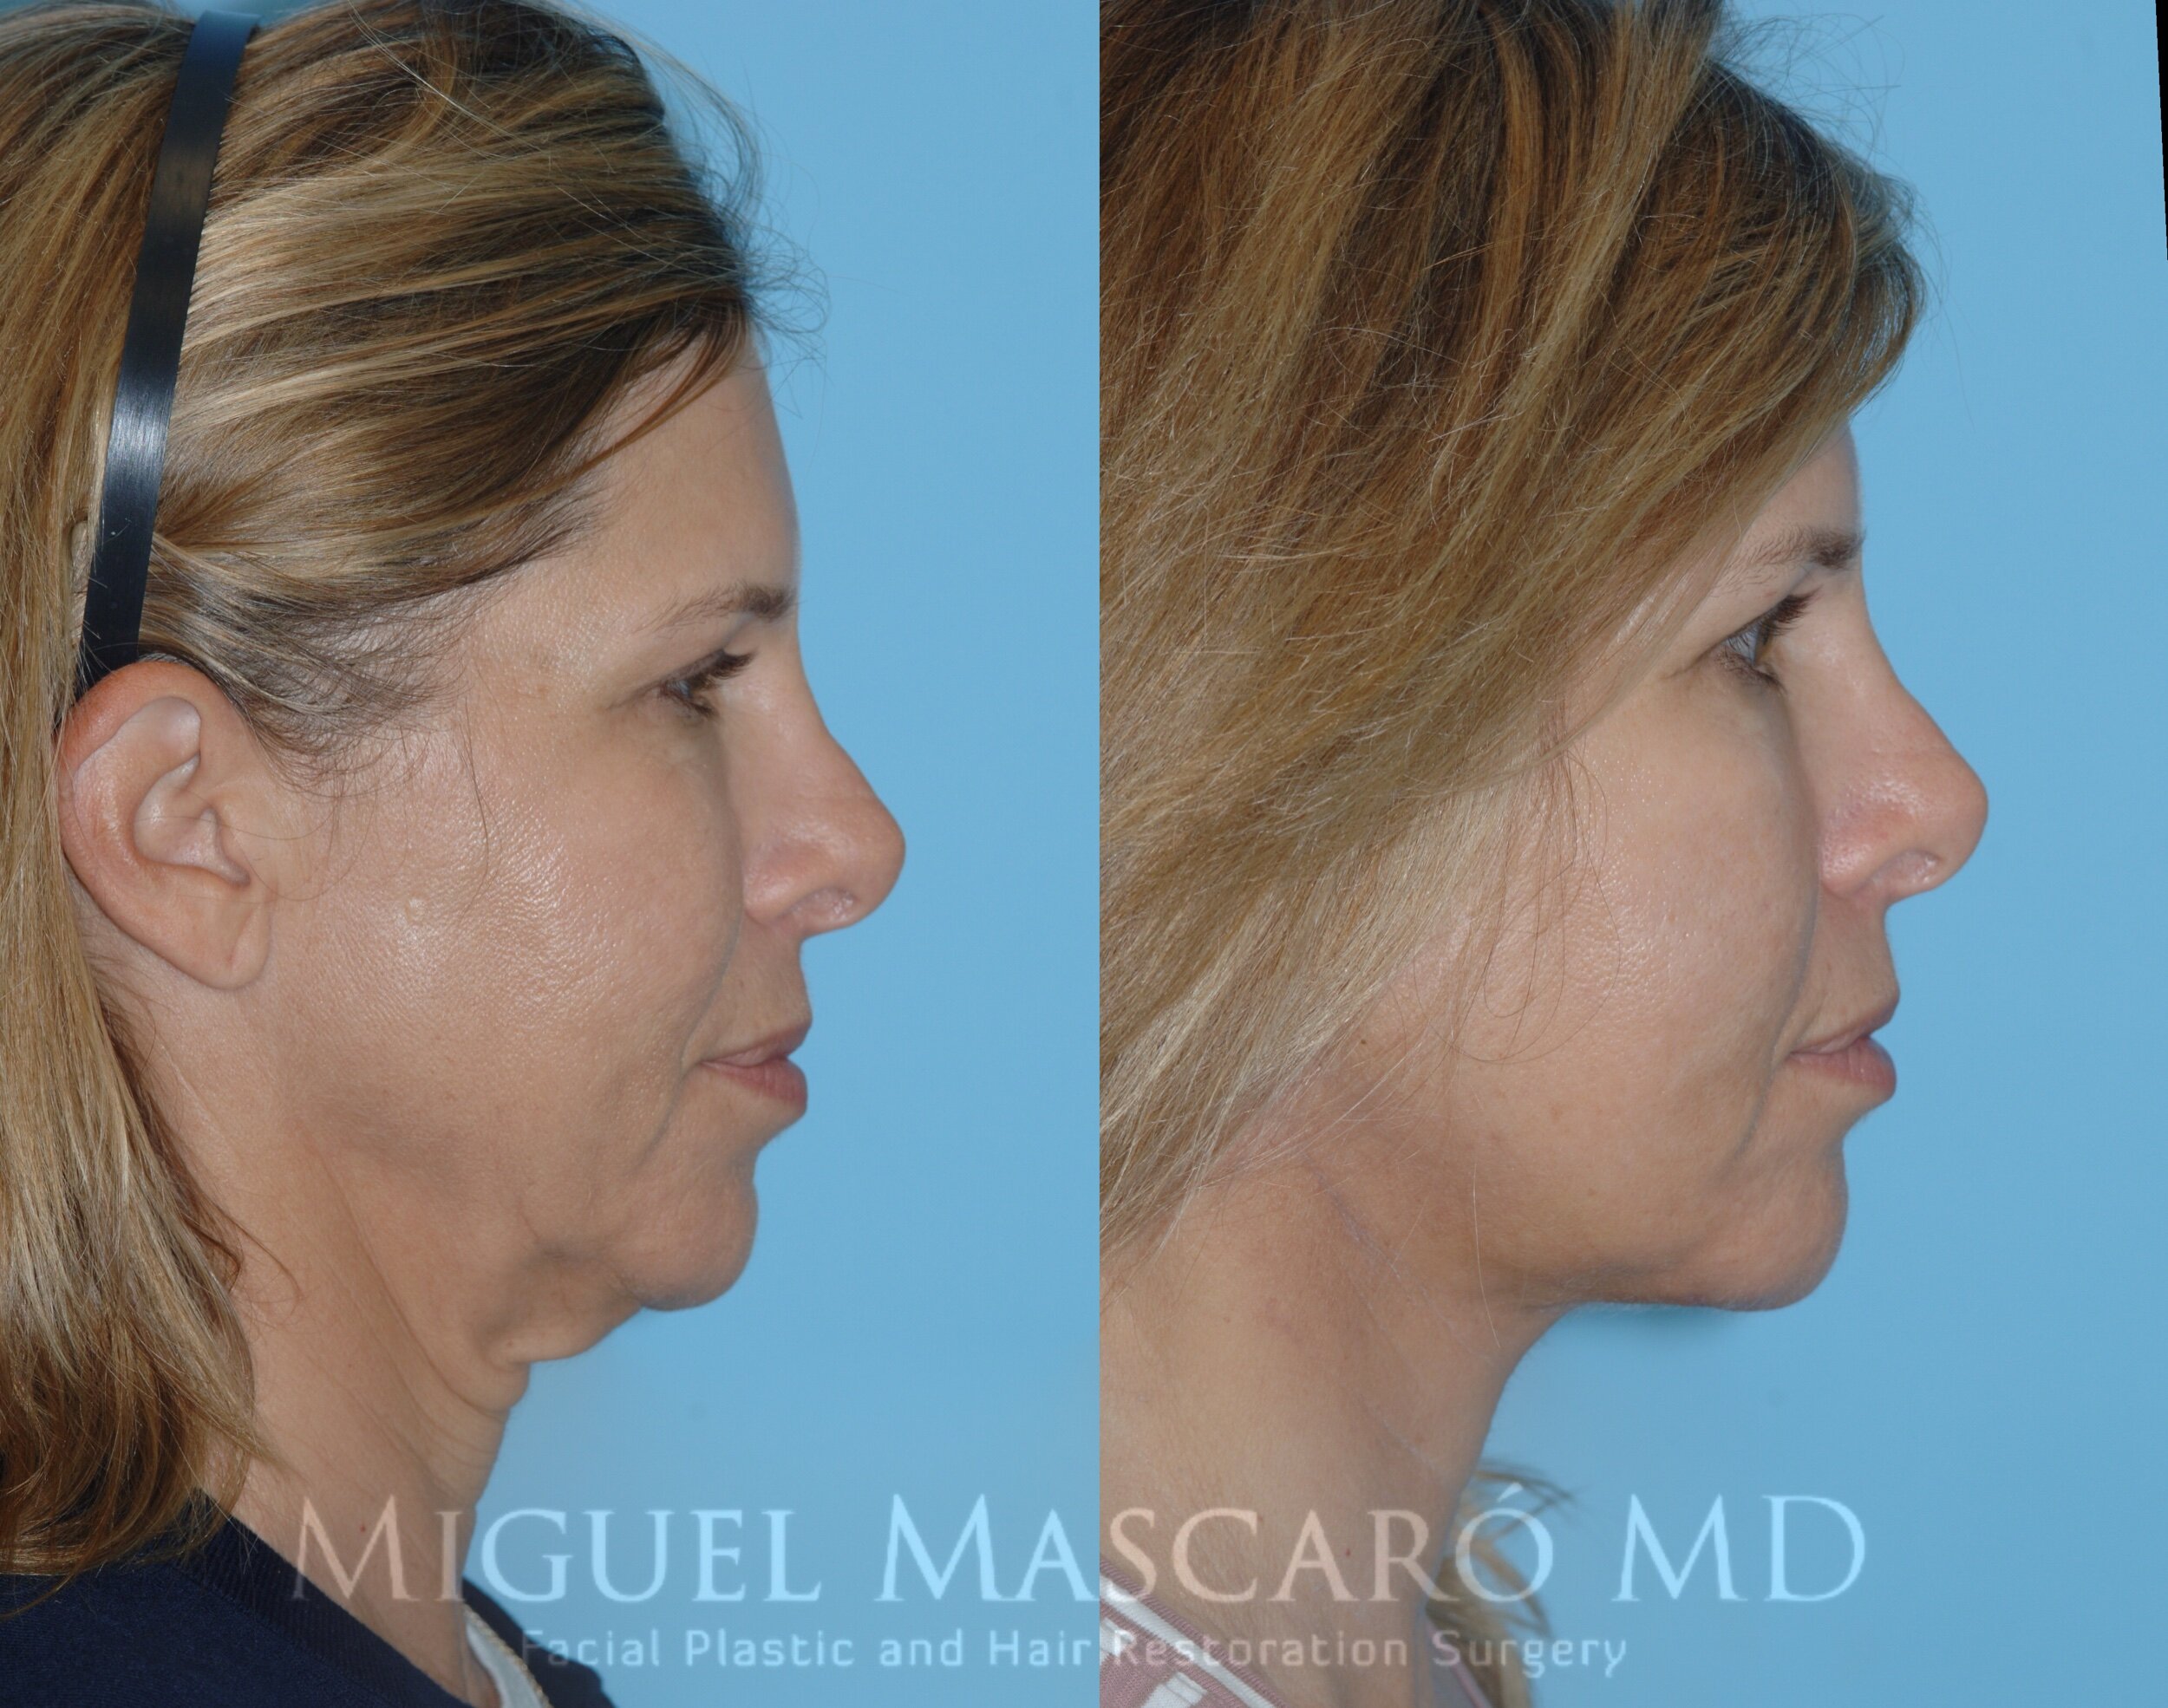  Submentoplasty - isolated surgical neck lift with no incision in front of the ears   